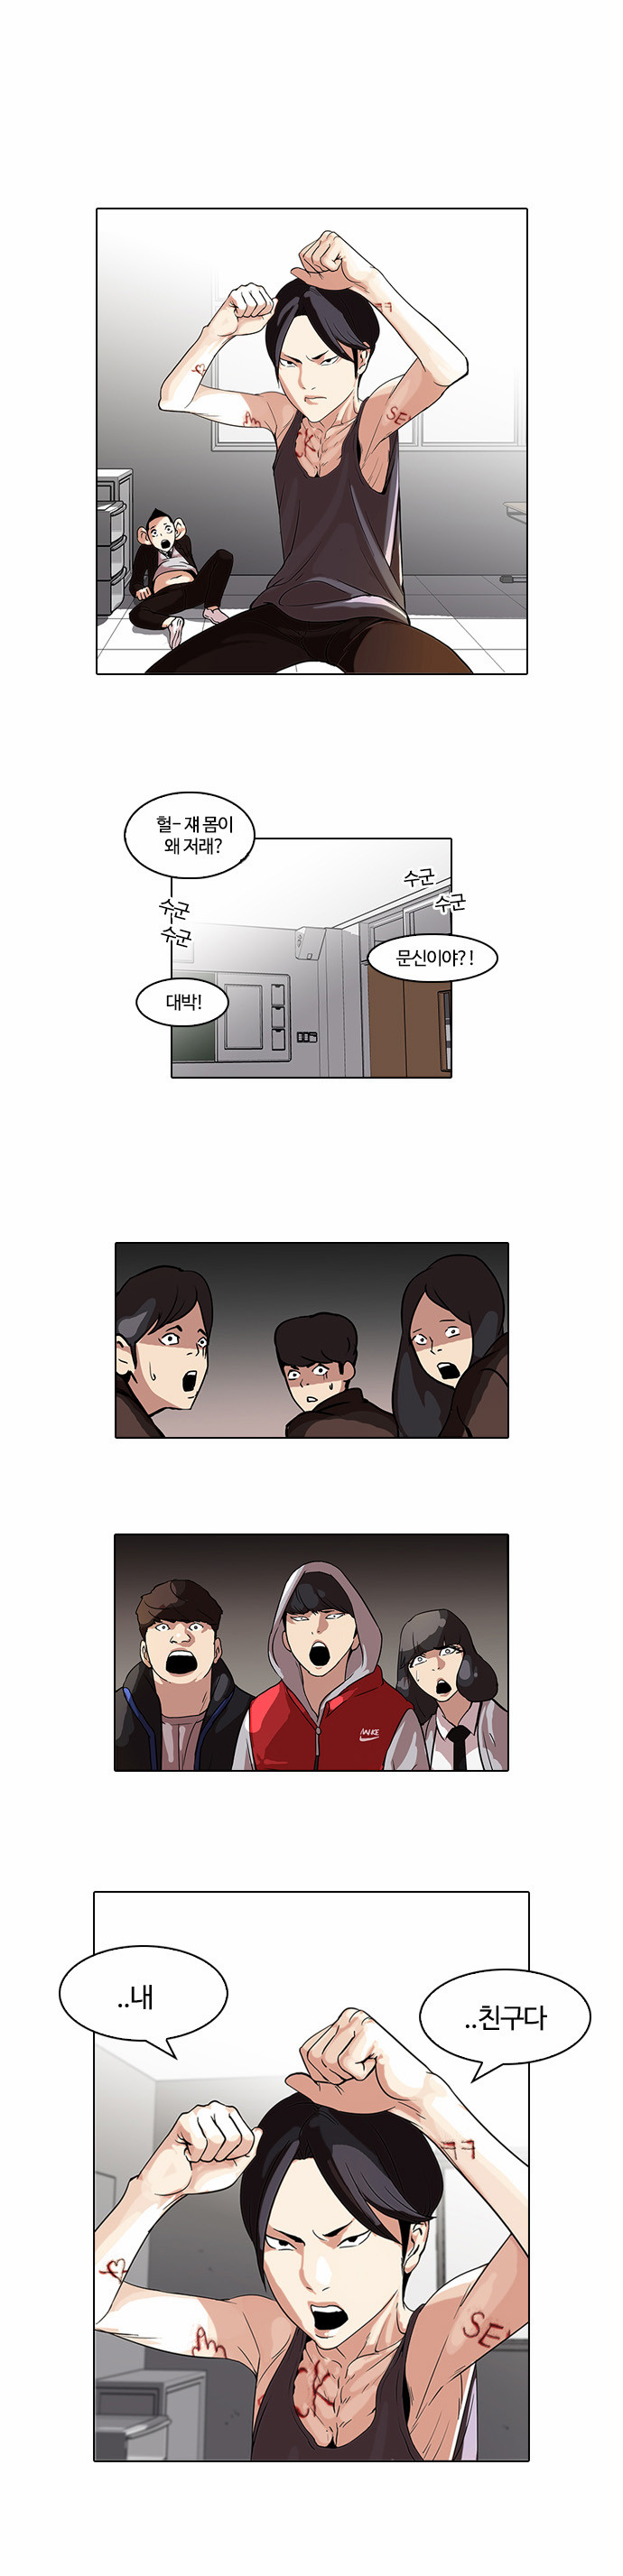 Lookism - Chapter 55 - Page 1